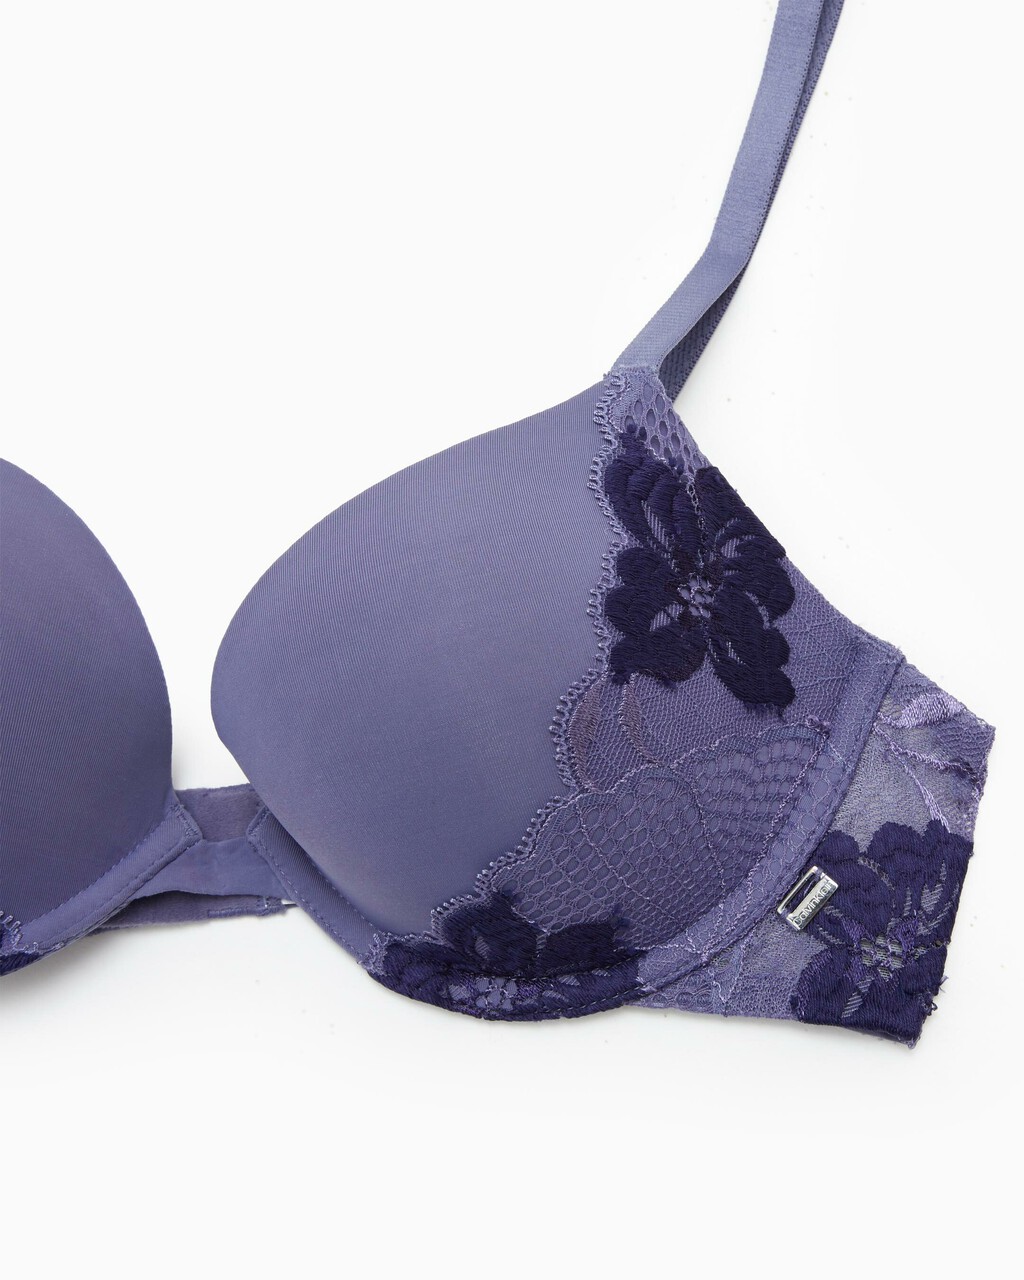 PERFECTLY FIT POPPY PUSH UP PLUNGE BRA, BLEACHED DENIM, hi-res